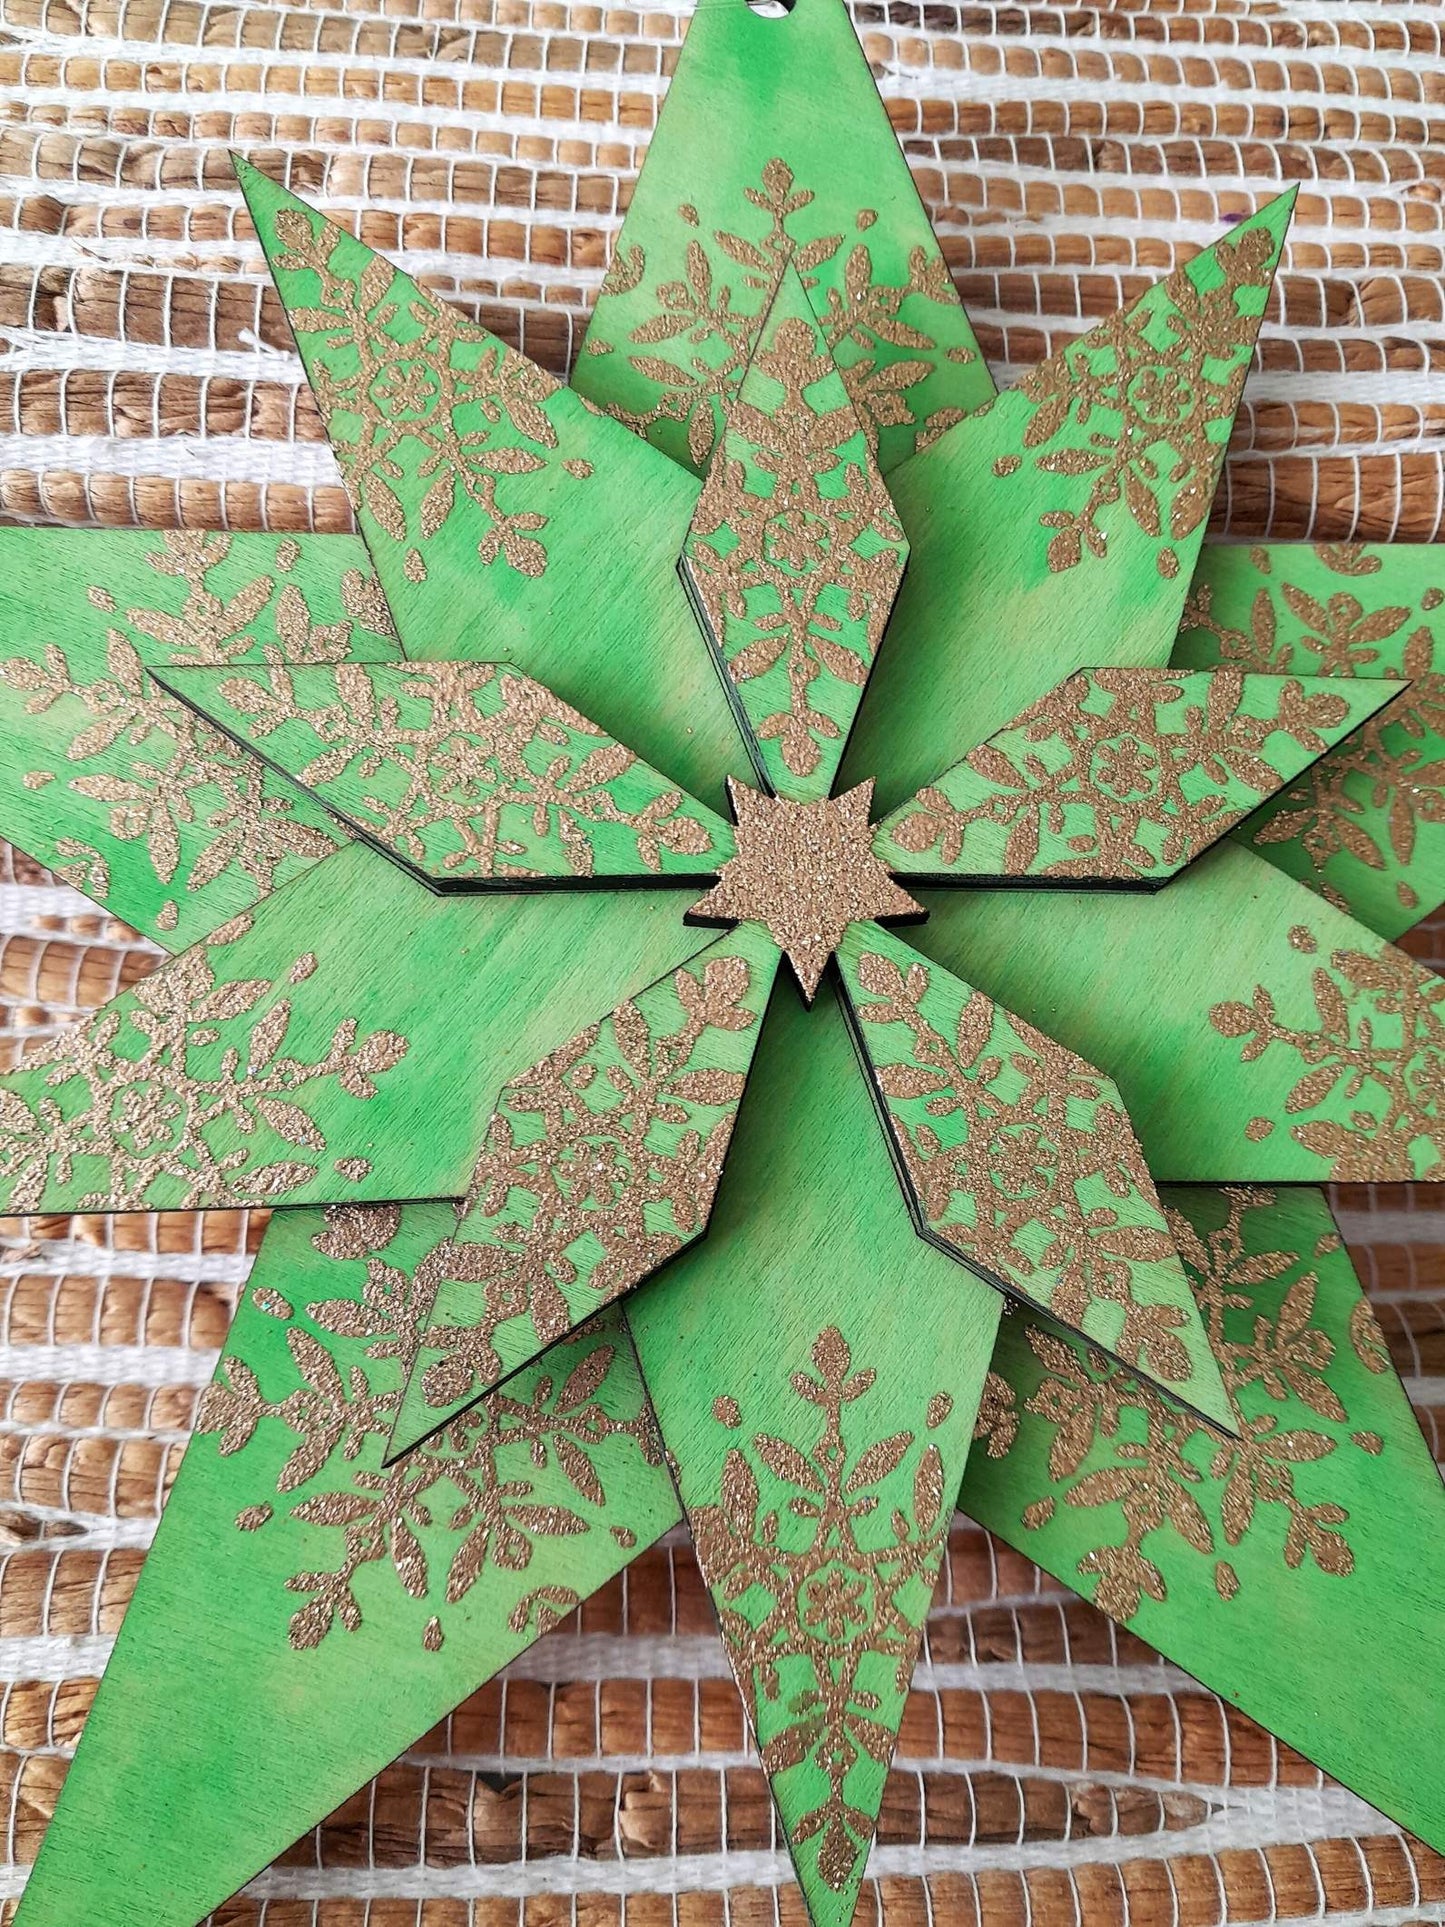 Large Handmade wooden star - green and gold